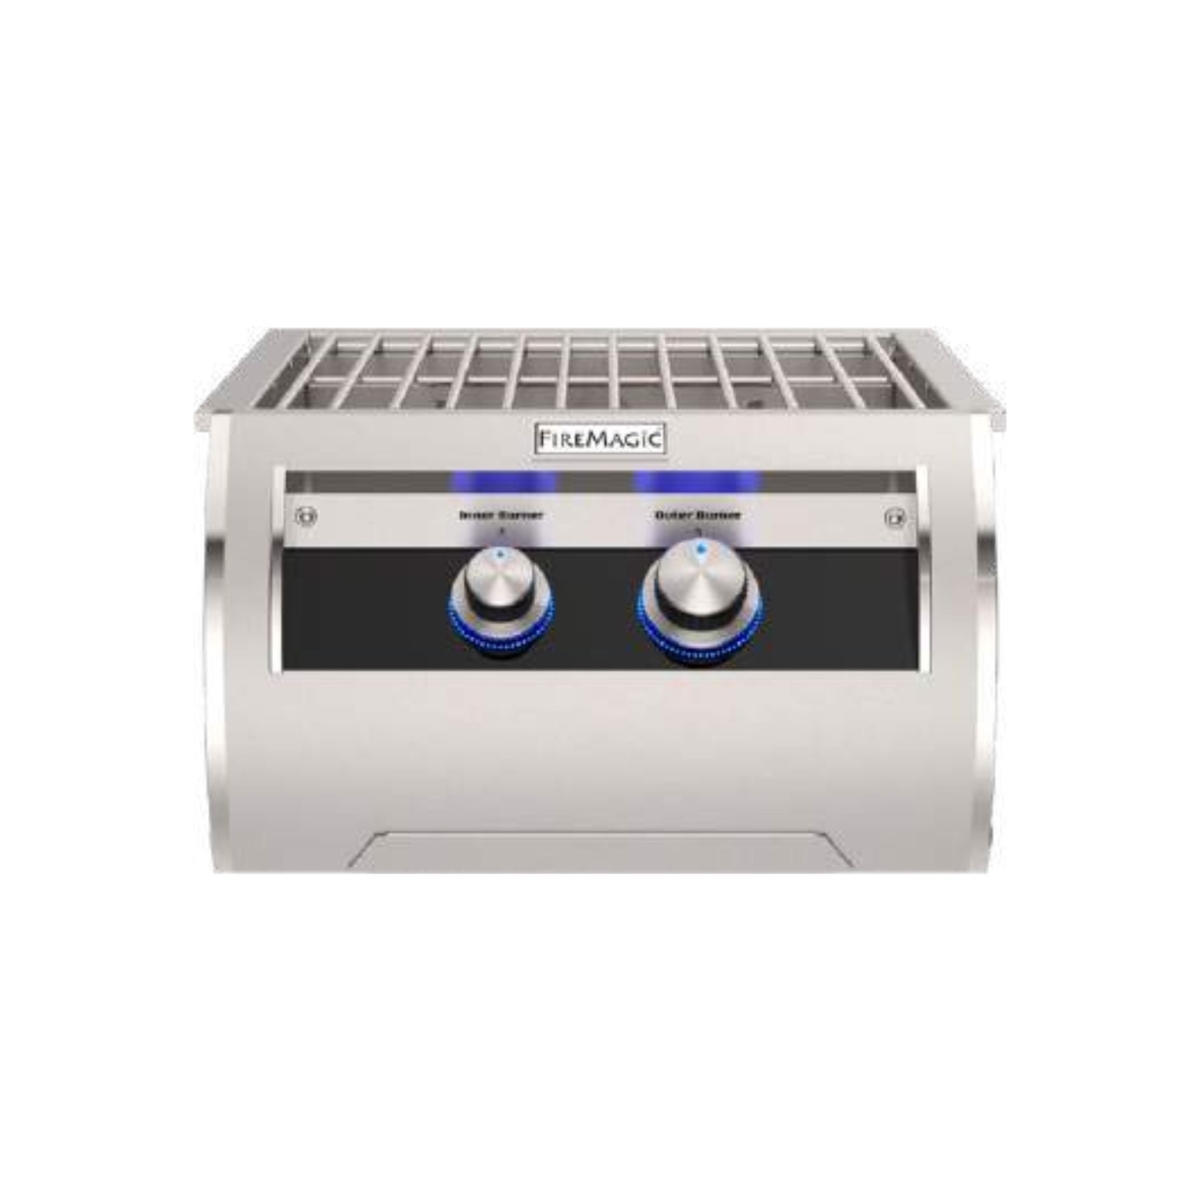 Fire Magic 19-6B2P-0 19 in. Echelon Diamond Built-In LP Gas Power Burner with Porcelain Cast Iron Grid for Grills